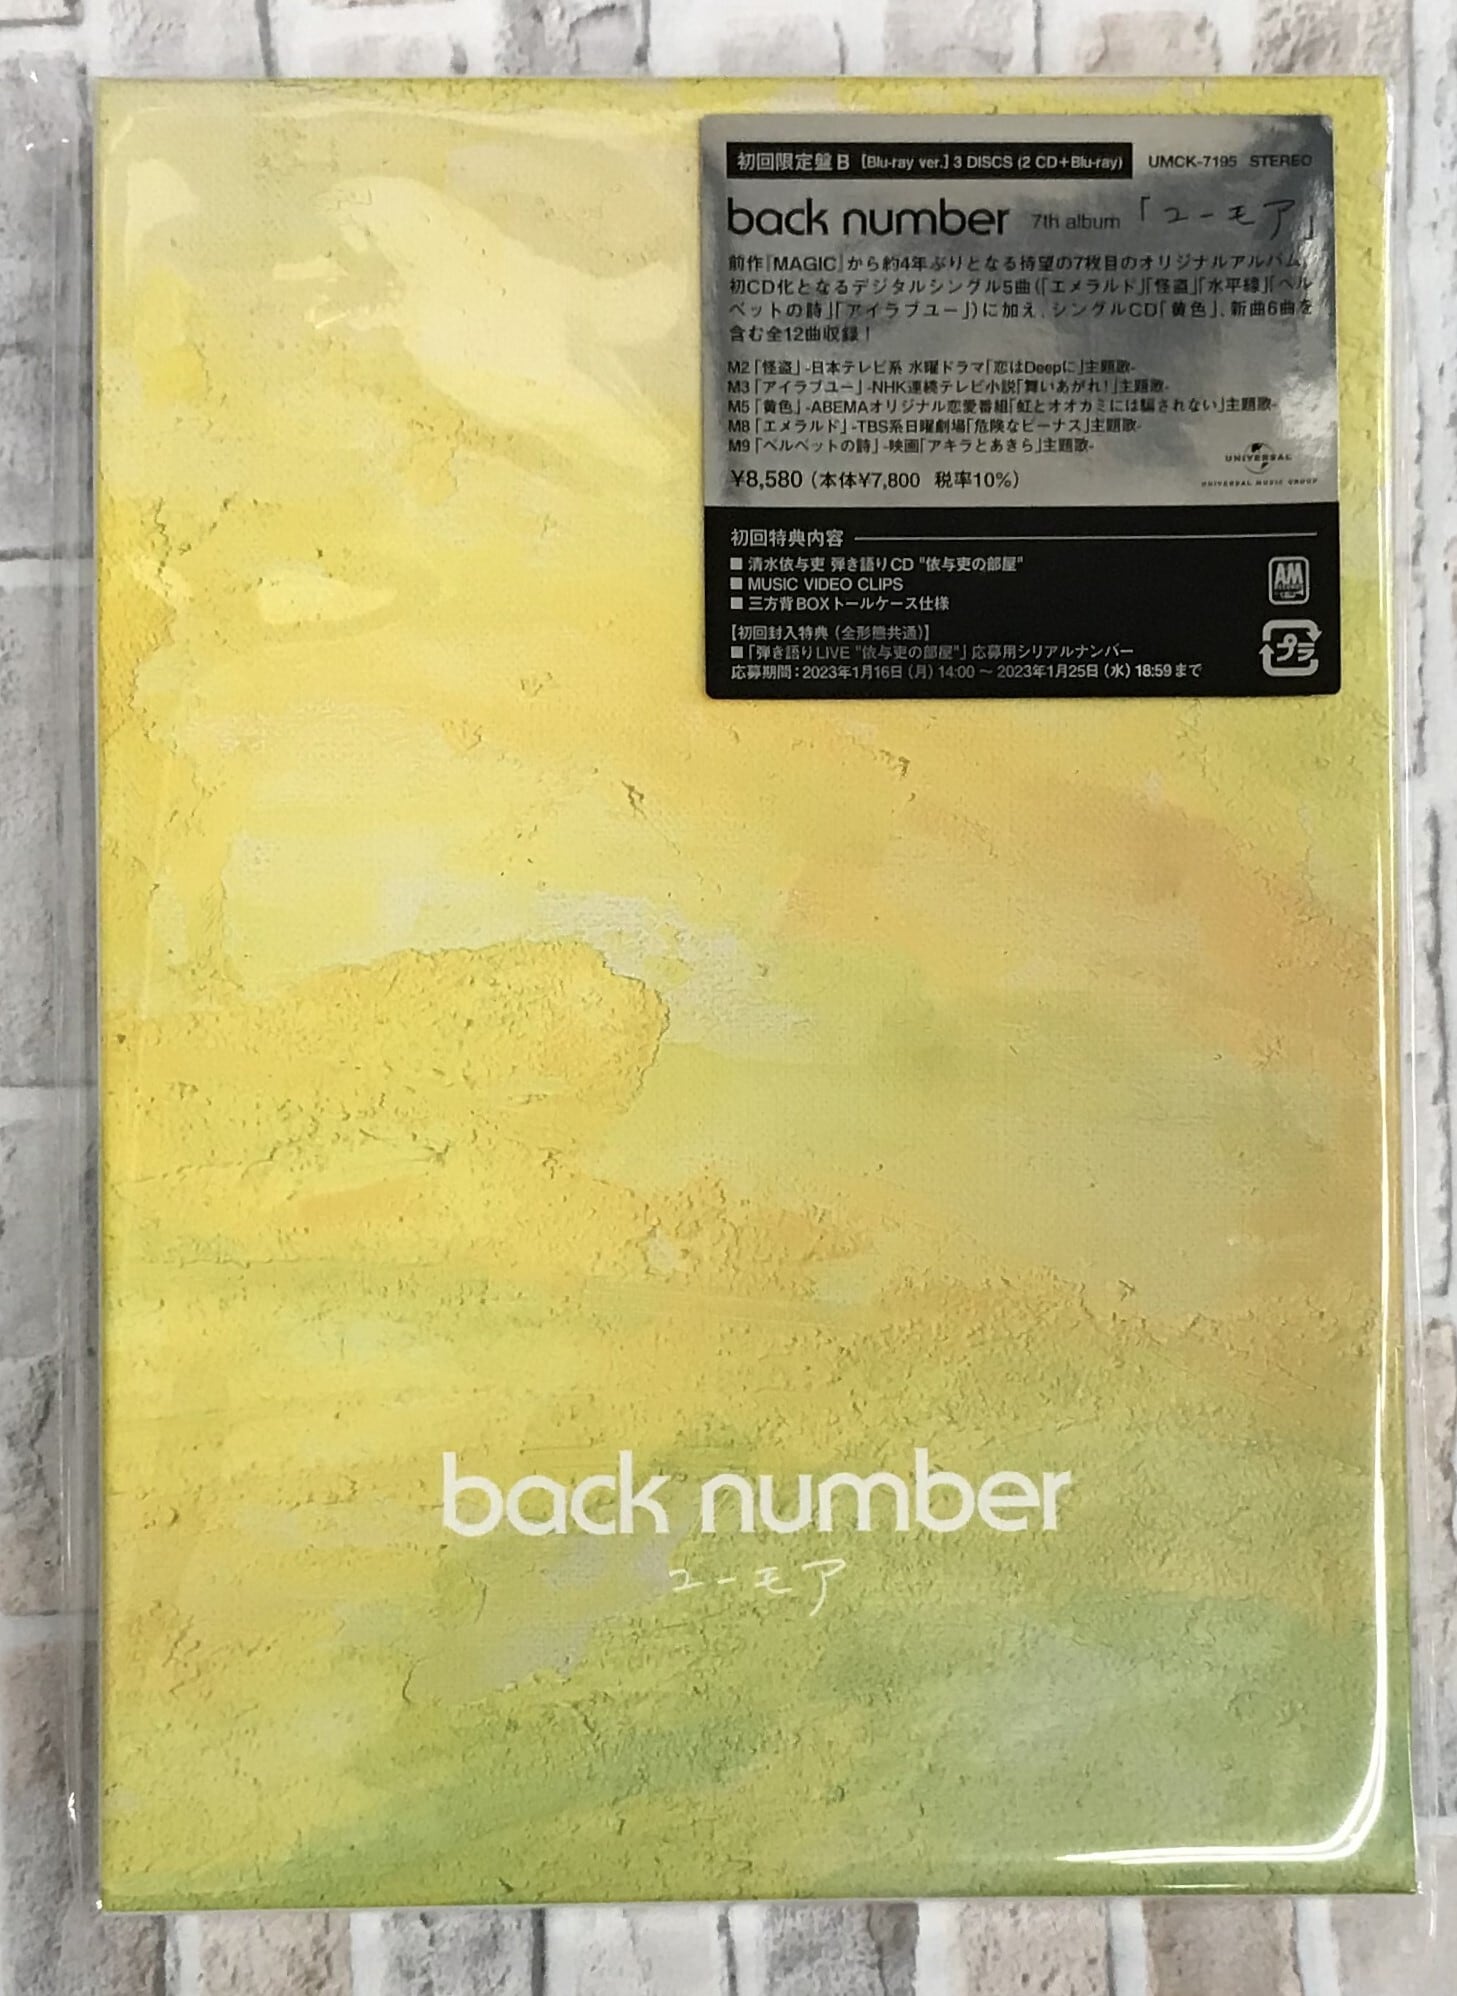 back number 黄色　CD DVD 初回限定盤 新品未使用ポップス/ロック(邦楽)